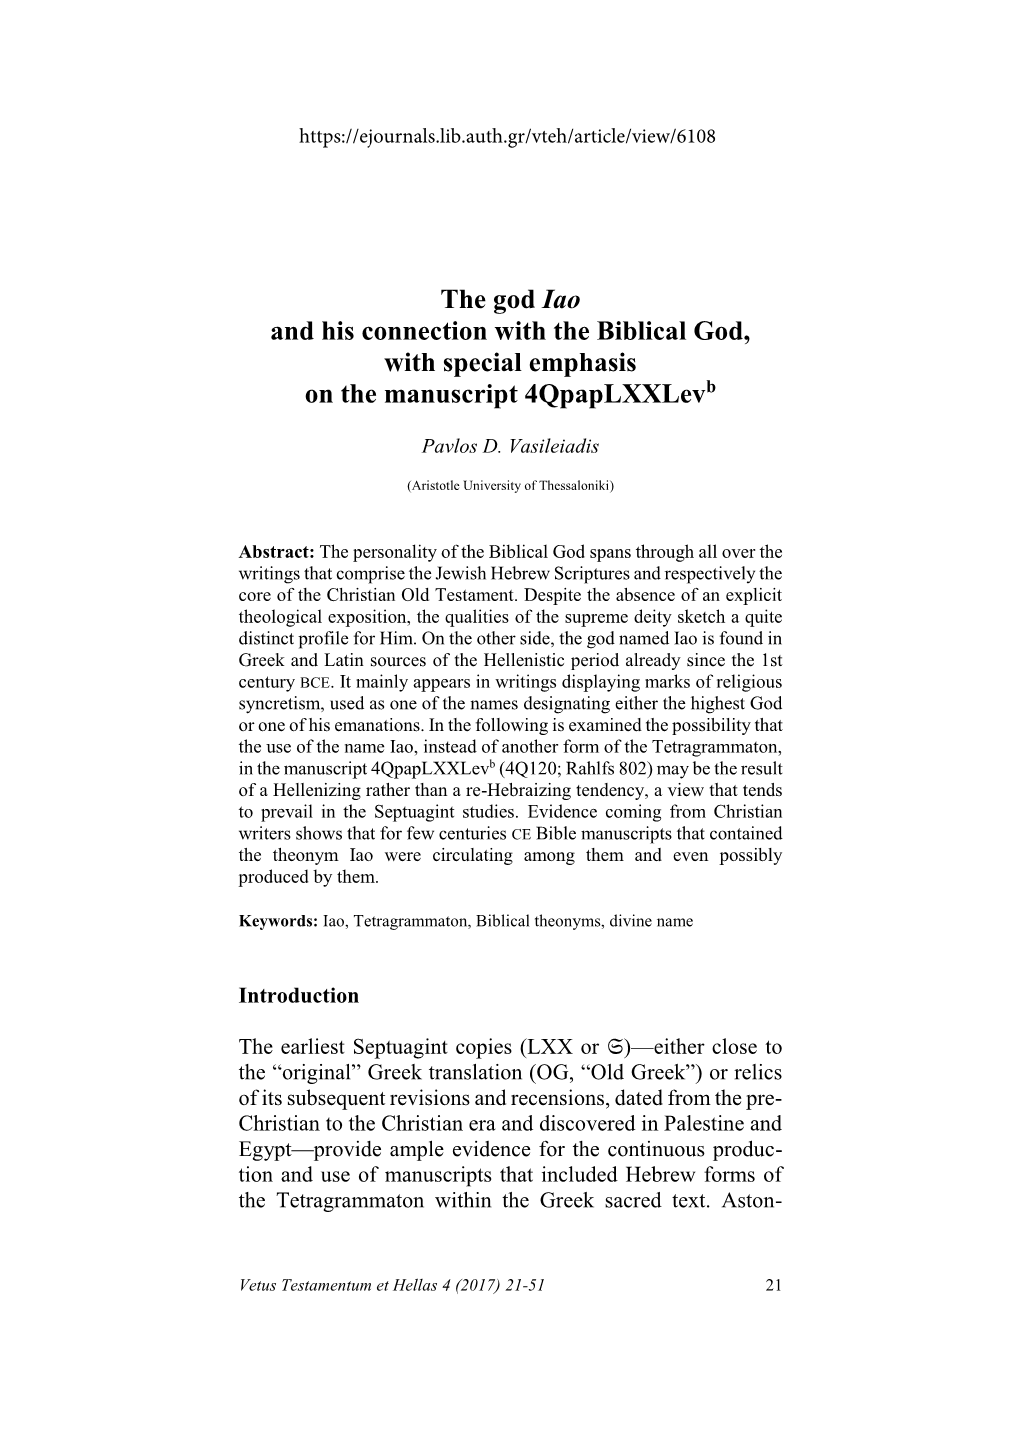 The God Iao and His Connection with the Biblical God, with Special Emphasis on the Manuscript 4Qpaplxxlevb